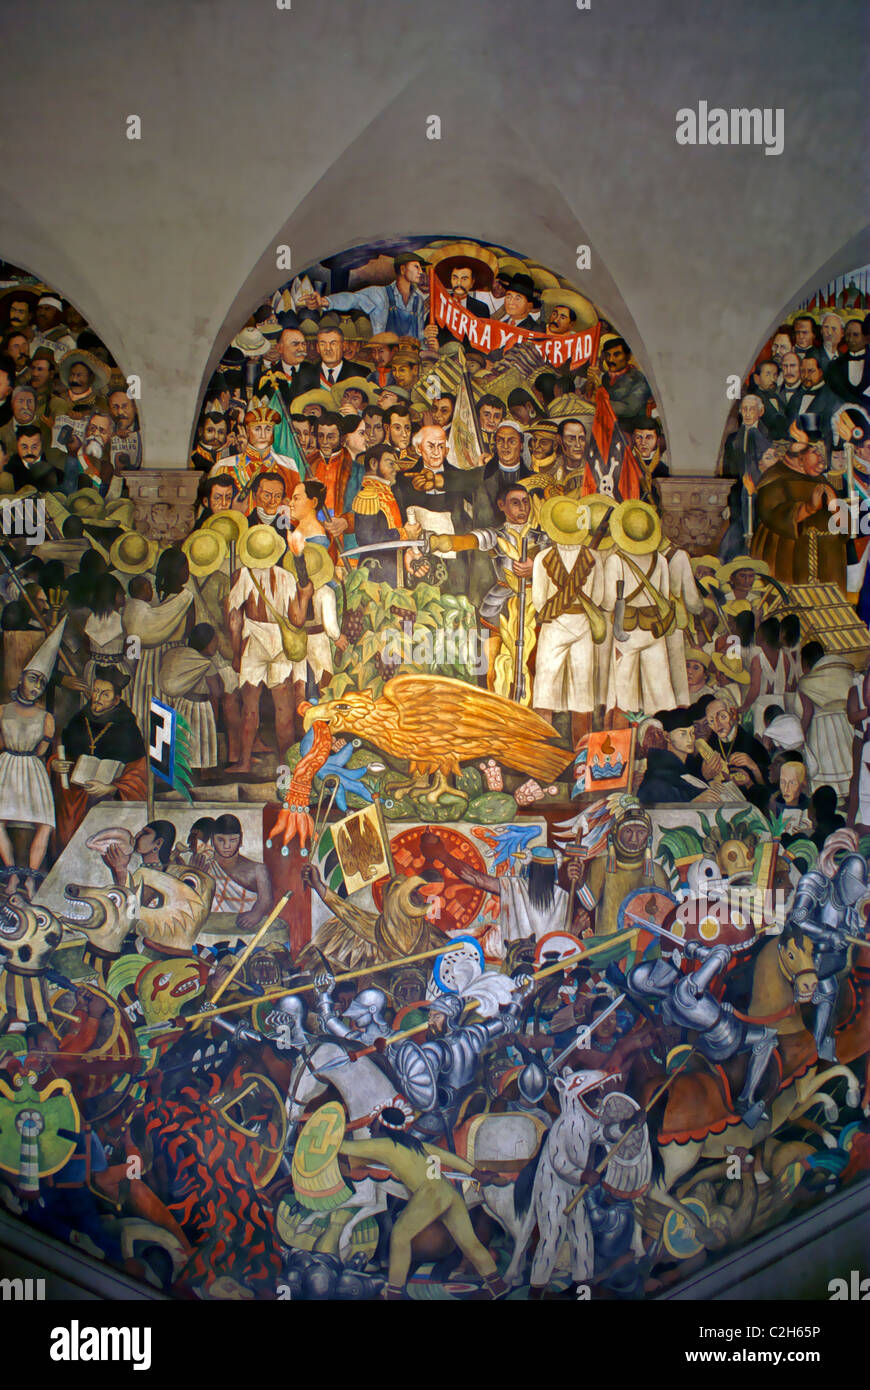 Mural by Diego Rivers depicting the history of Mexico, National Palace or Palacio Nacional, Mexico City Stock Photo